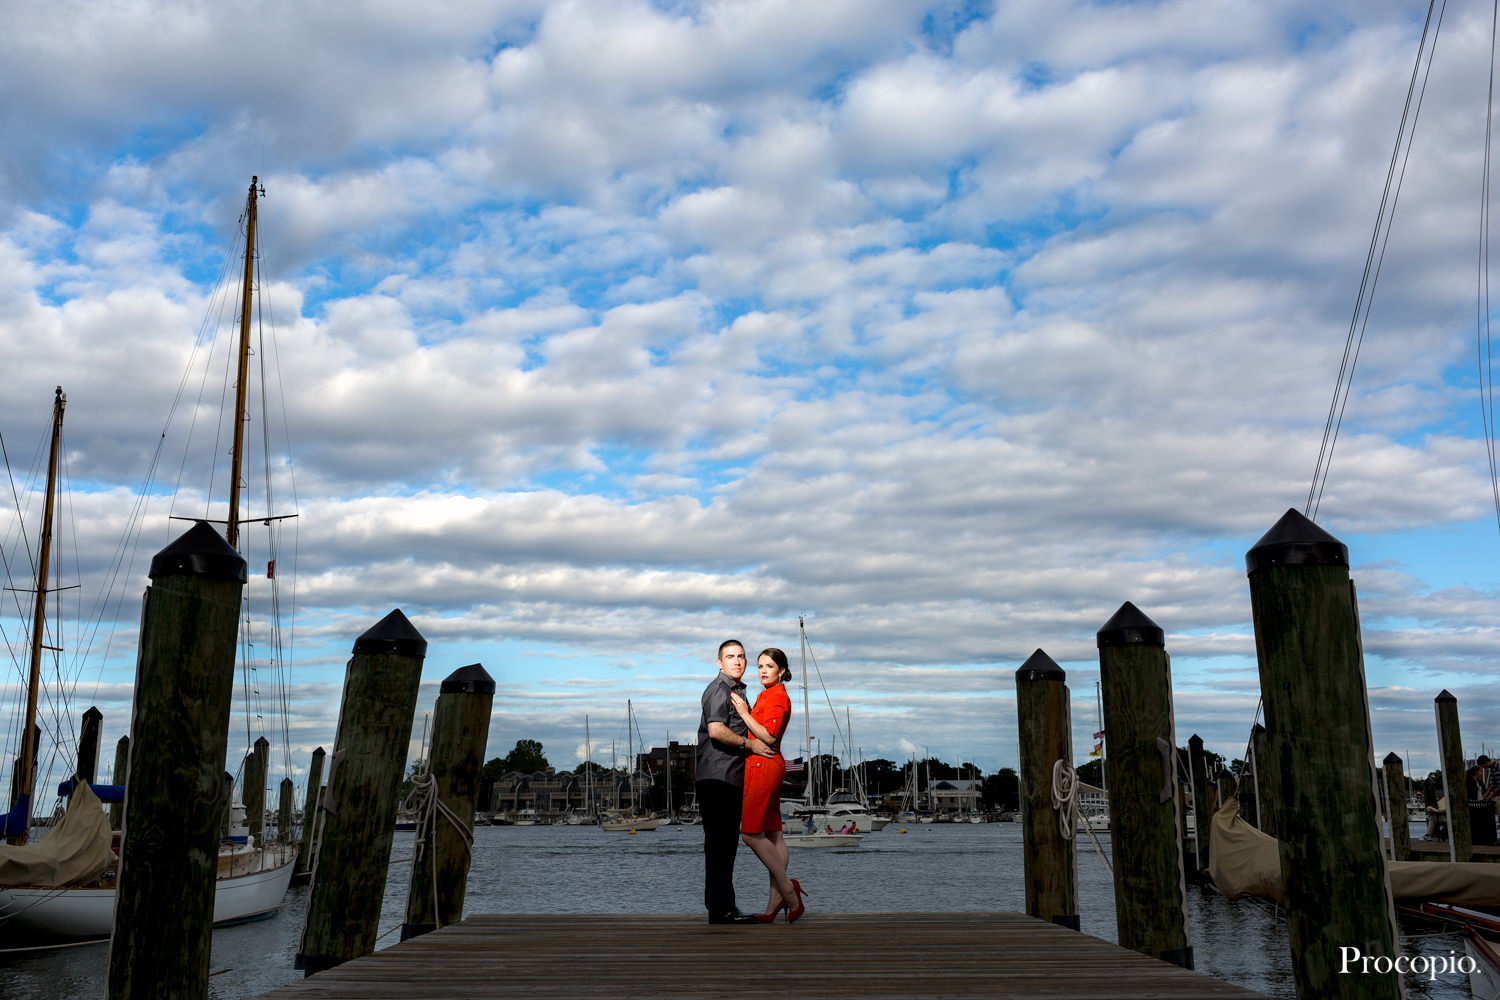 Annapolis Maryland Engagement Session, Docks, on the water, boating, trumpet player, musician, Procopio Photography, best top Washington DC photographer, best top Maryland photographer, best top Virginia photographer, best top DMV photographer, best top wedding photographer, best top commercial photographer, best top portrait photographer, best top boudoir photographer, modern fine art portraits, dramatic, unique, different, bold, editorial, photojournalism, award winning photographer, published photographer, memorable images, be different, stand out